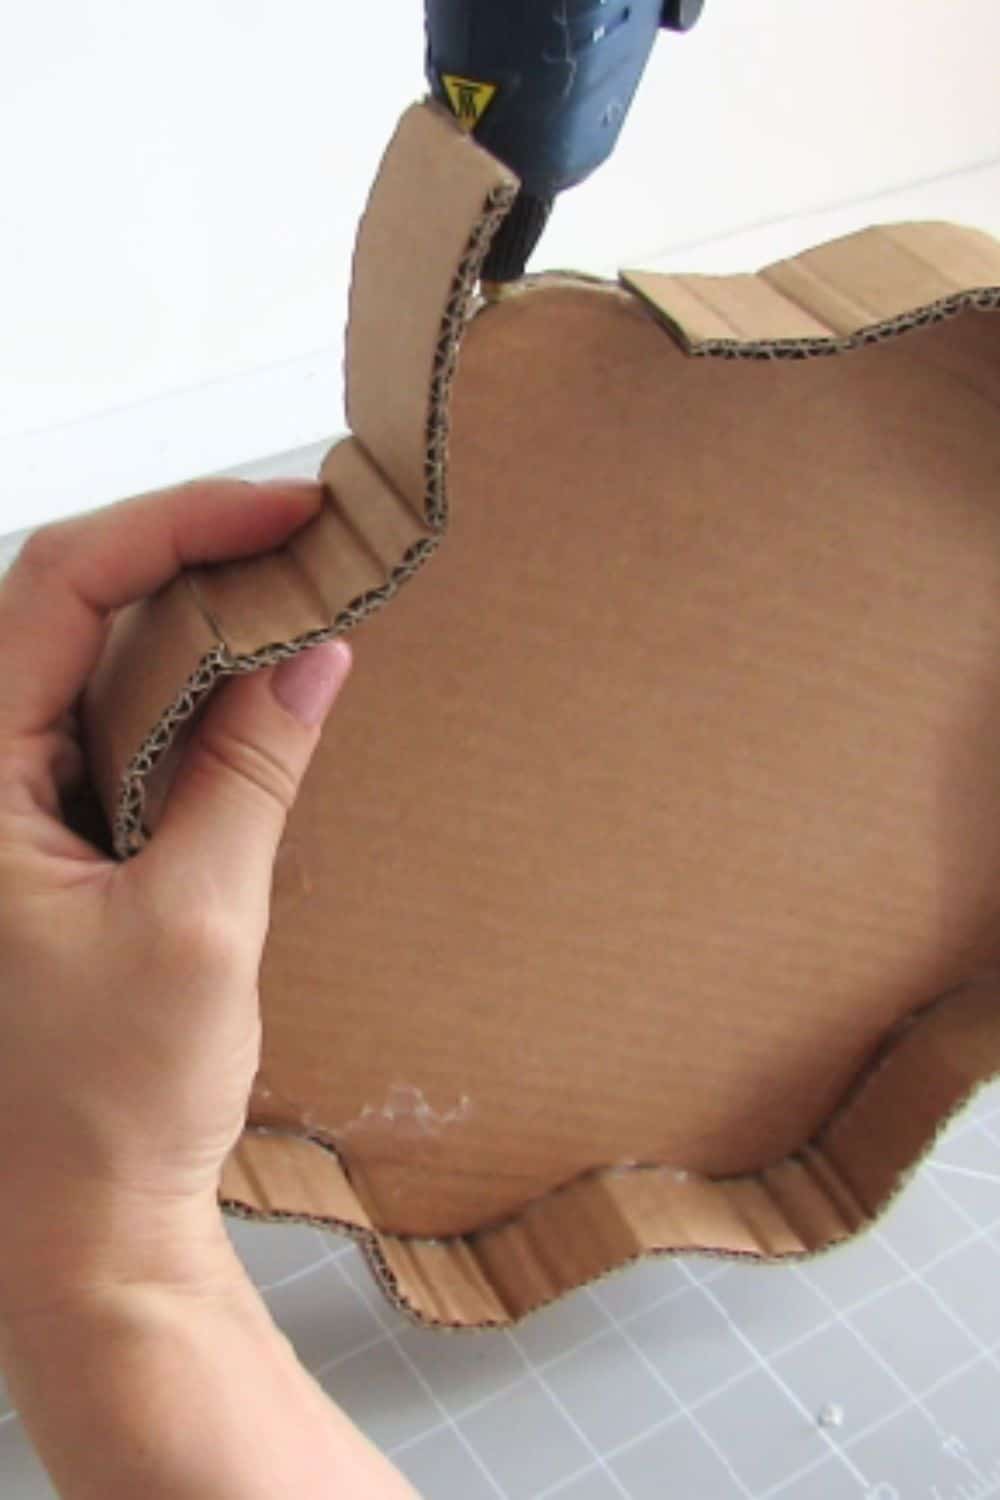 assemble the cardboard tray